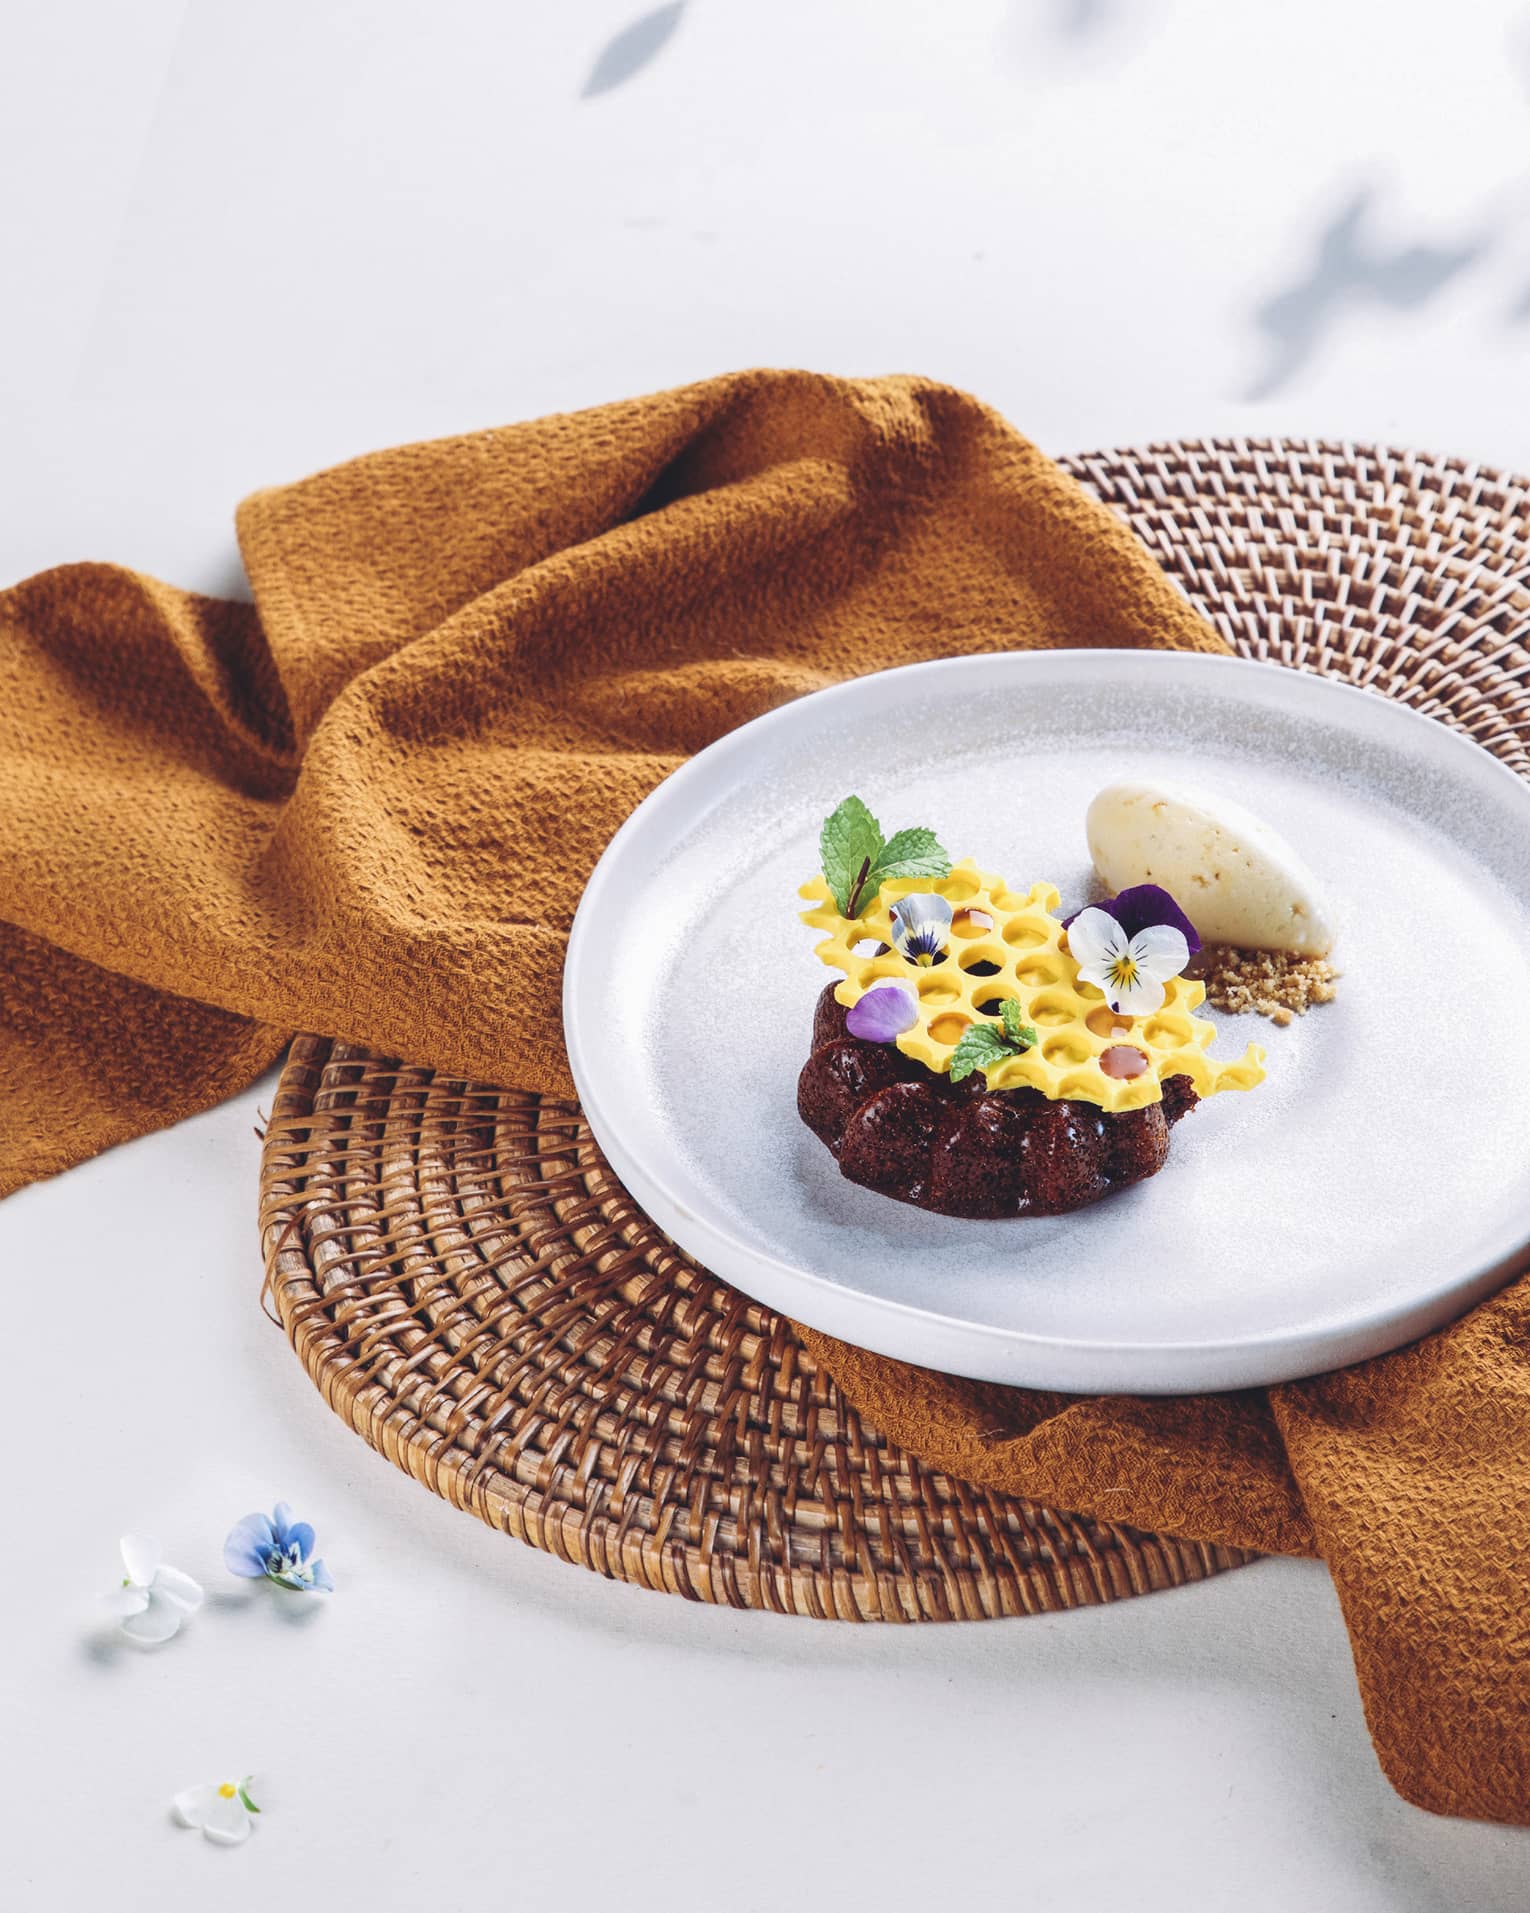 A rich chocolate mini-cake topped with honeycomb-shaped white chocolate garnished with mint leaves and dainty flower petals